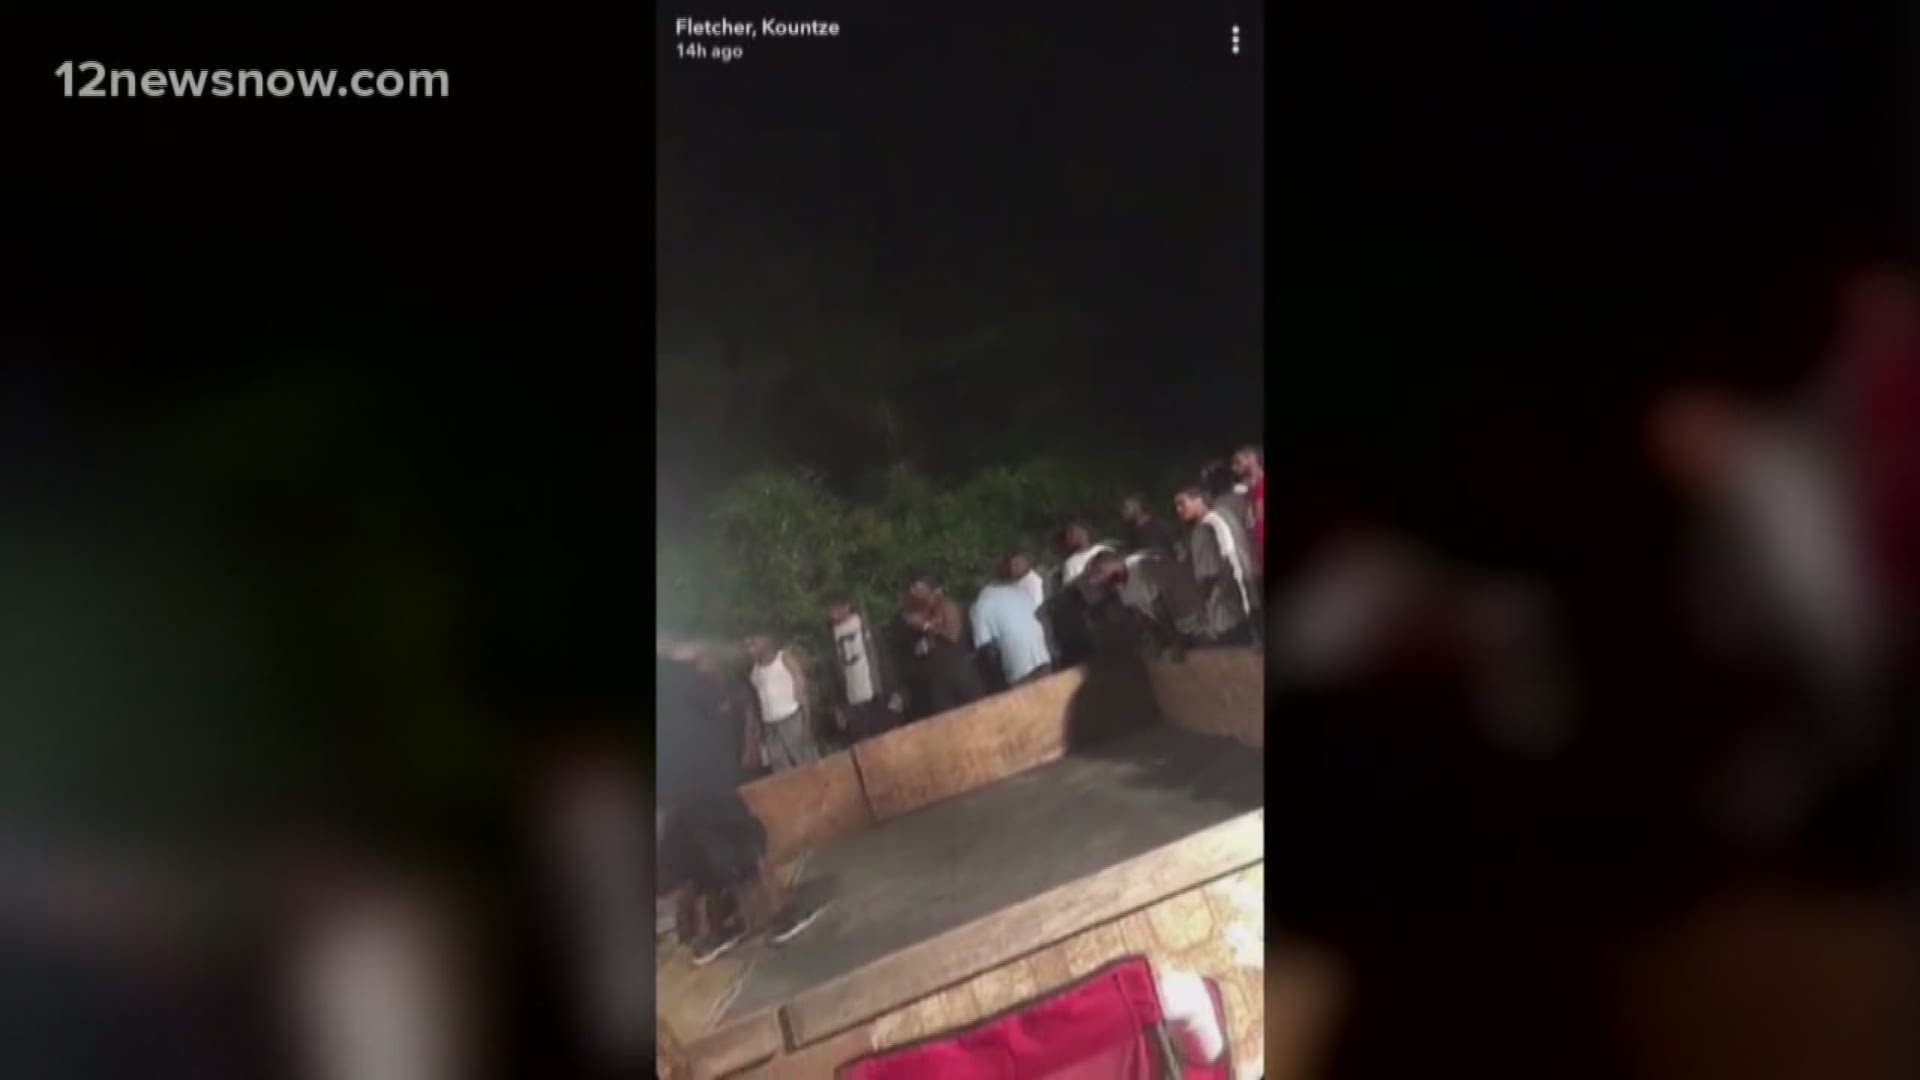 A public video on Snapchat showed several people crowded around a closed area.